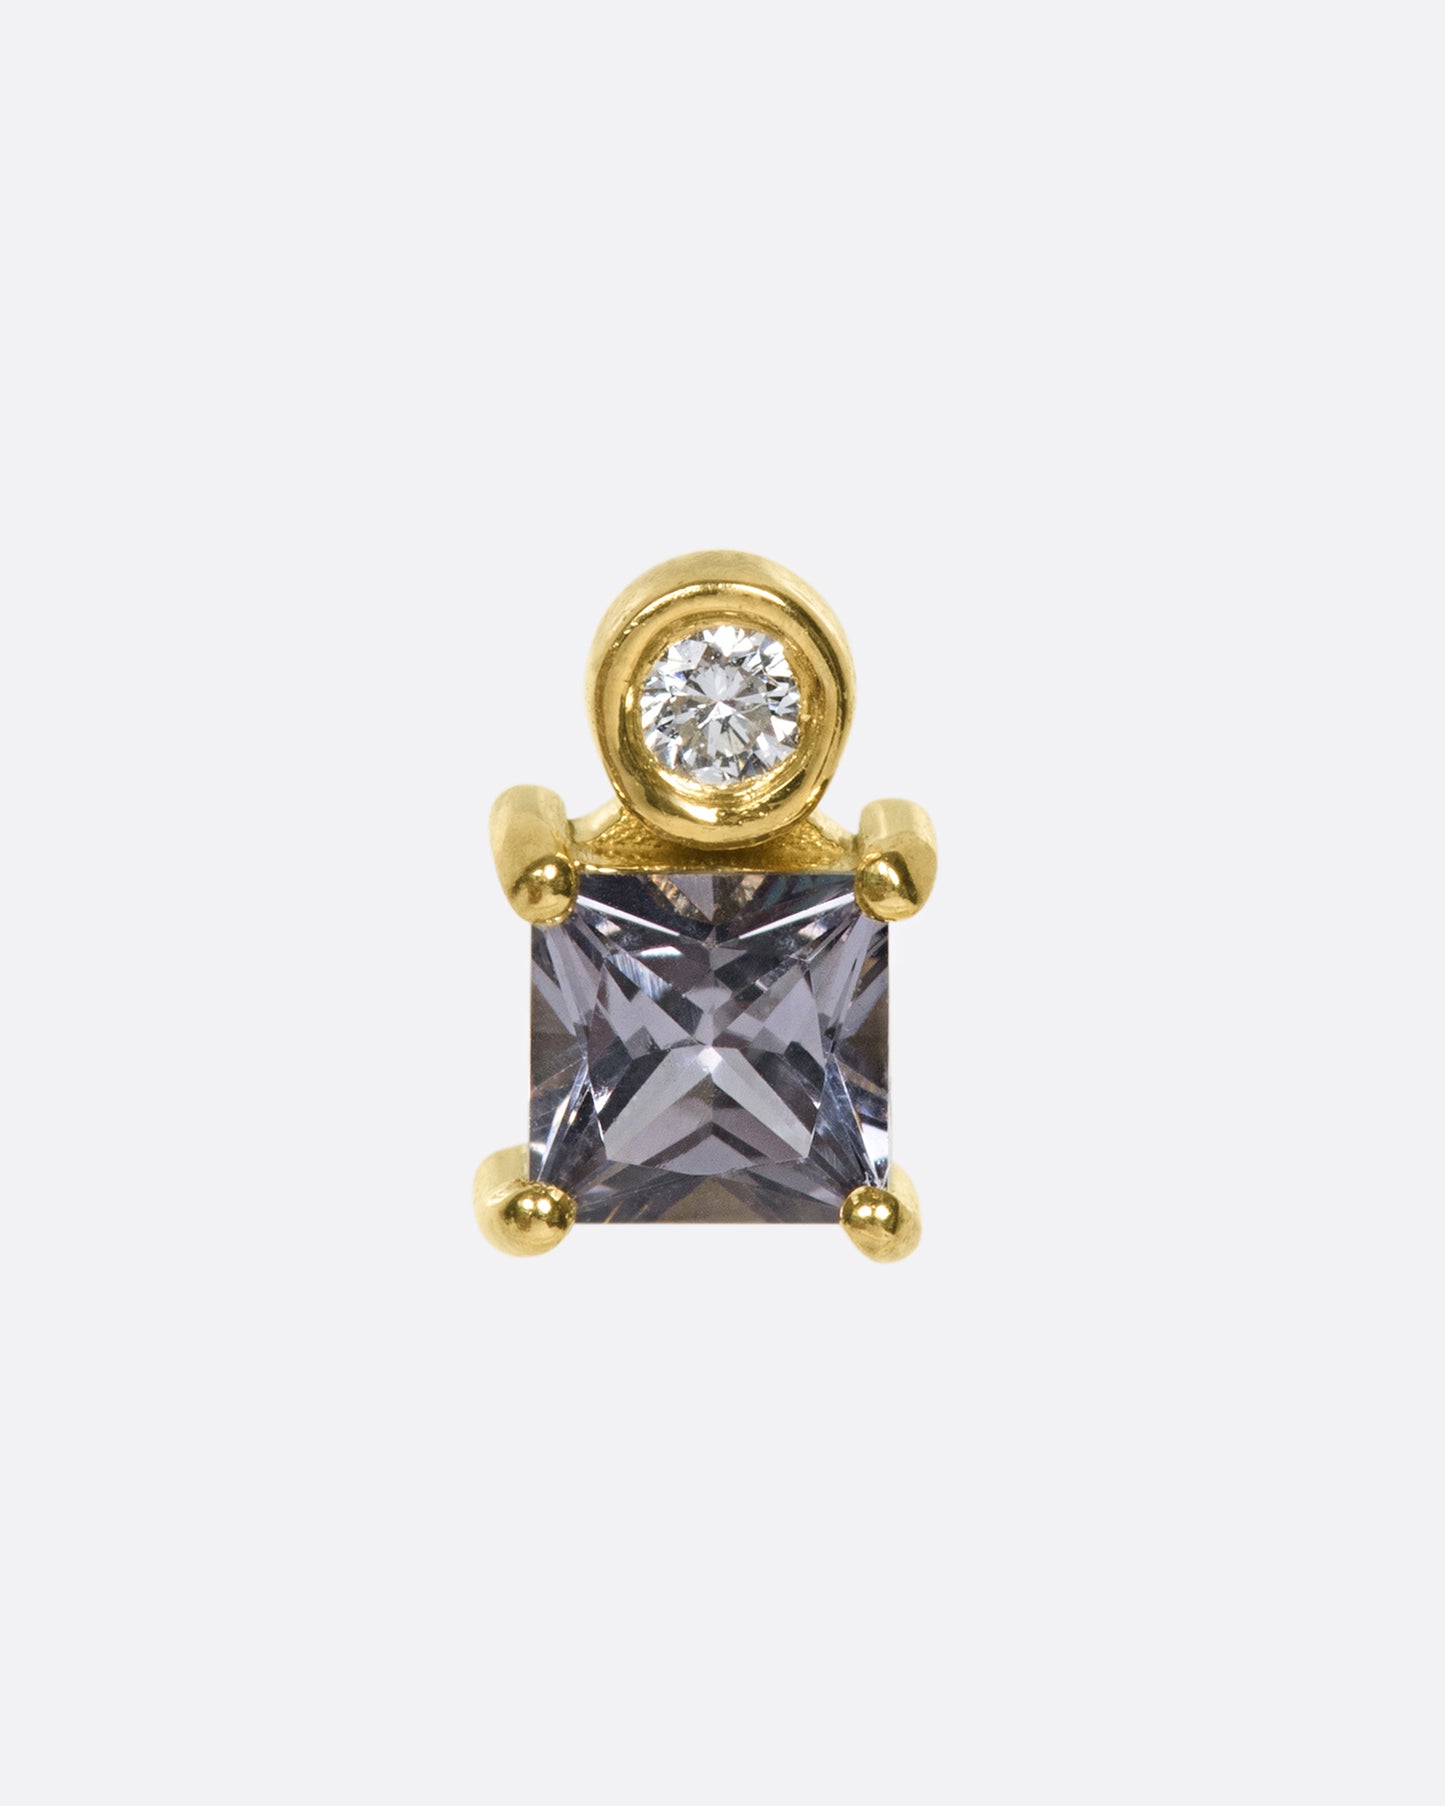 While the fancy, purple-gray spinel is the star of this piece, the diamond accent adds just the right about of brightness.